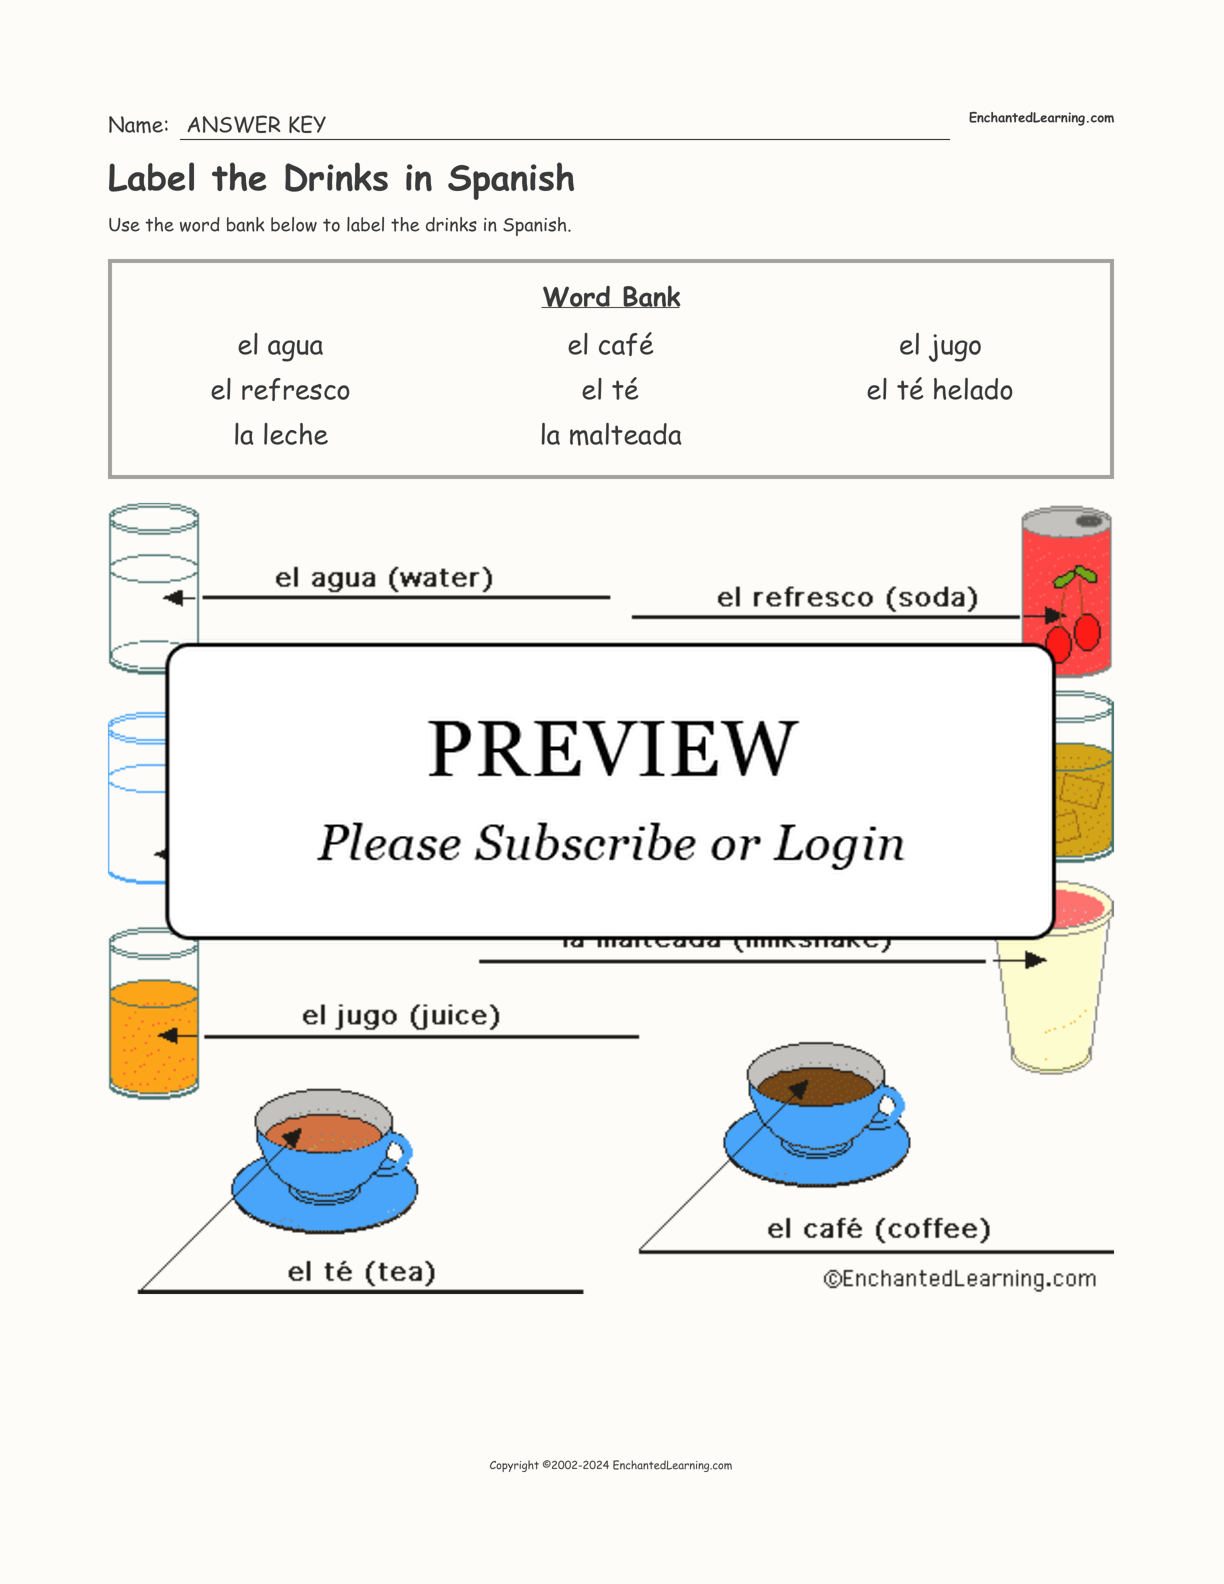 Label the Drinks in Spanish interactive worksheet page 2